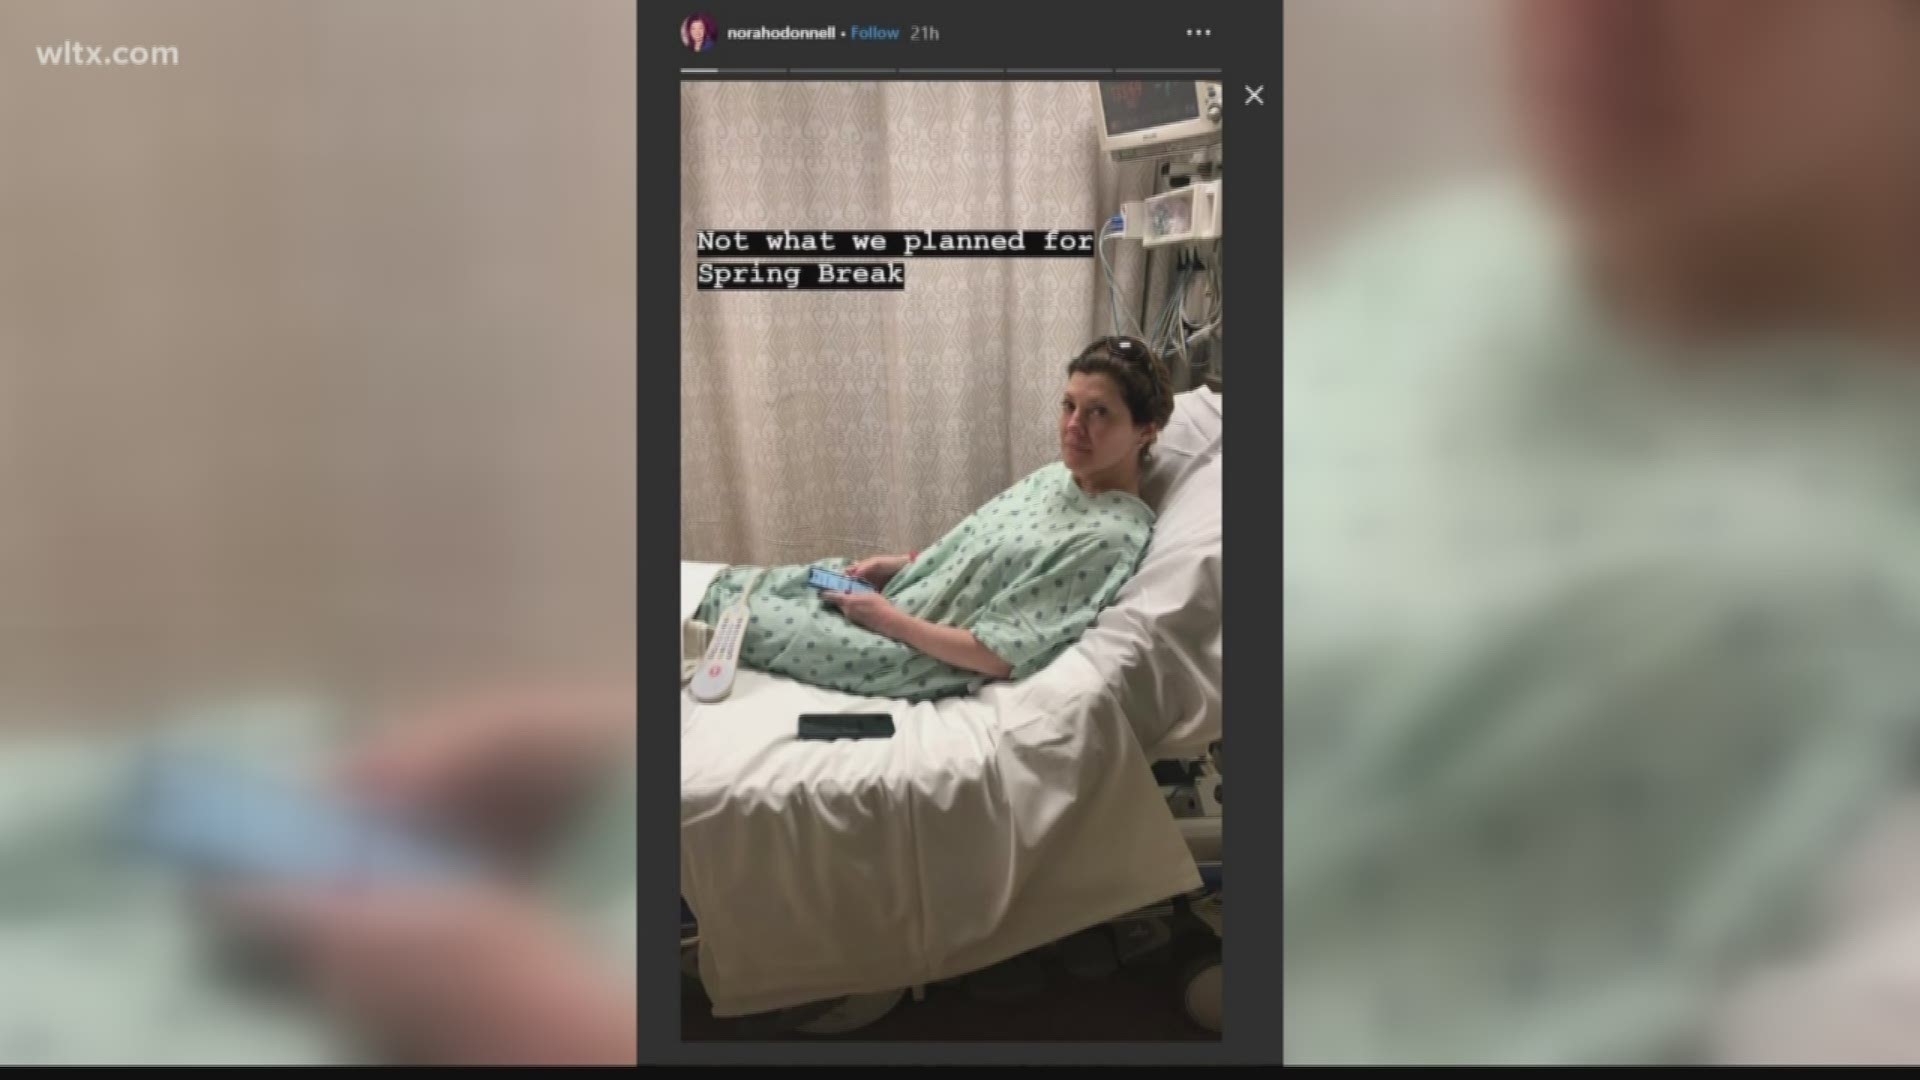 In a post on her Instagram story, O'Donnell says she had to undergo surgery at the Medical University of South Carolina Friday evening.